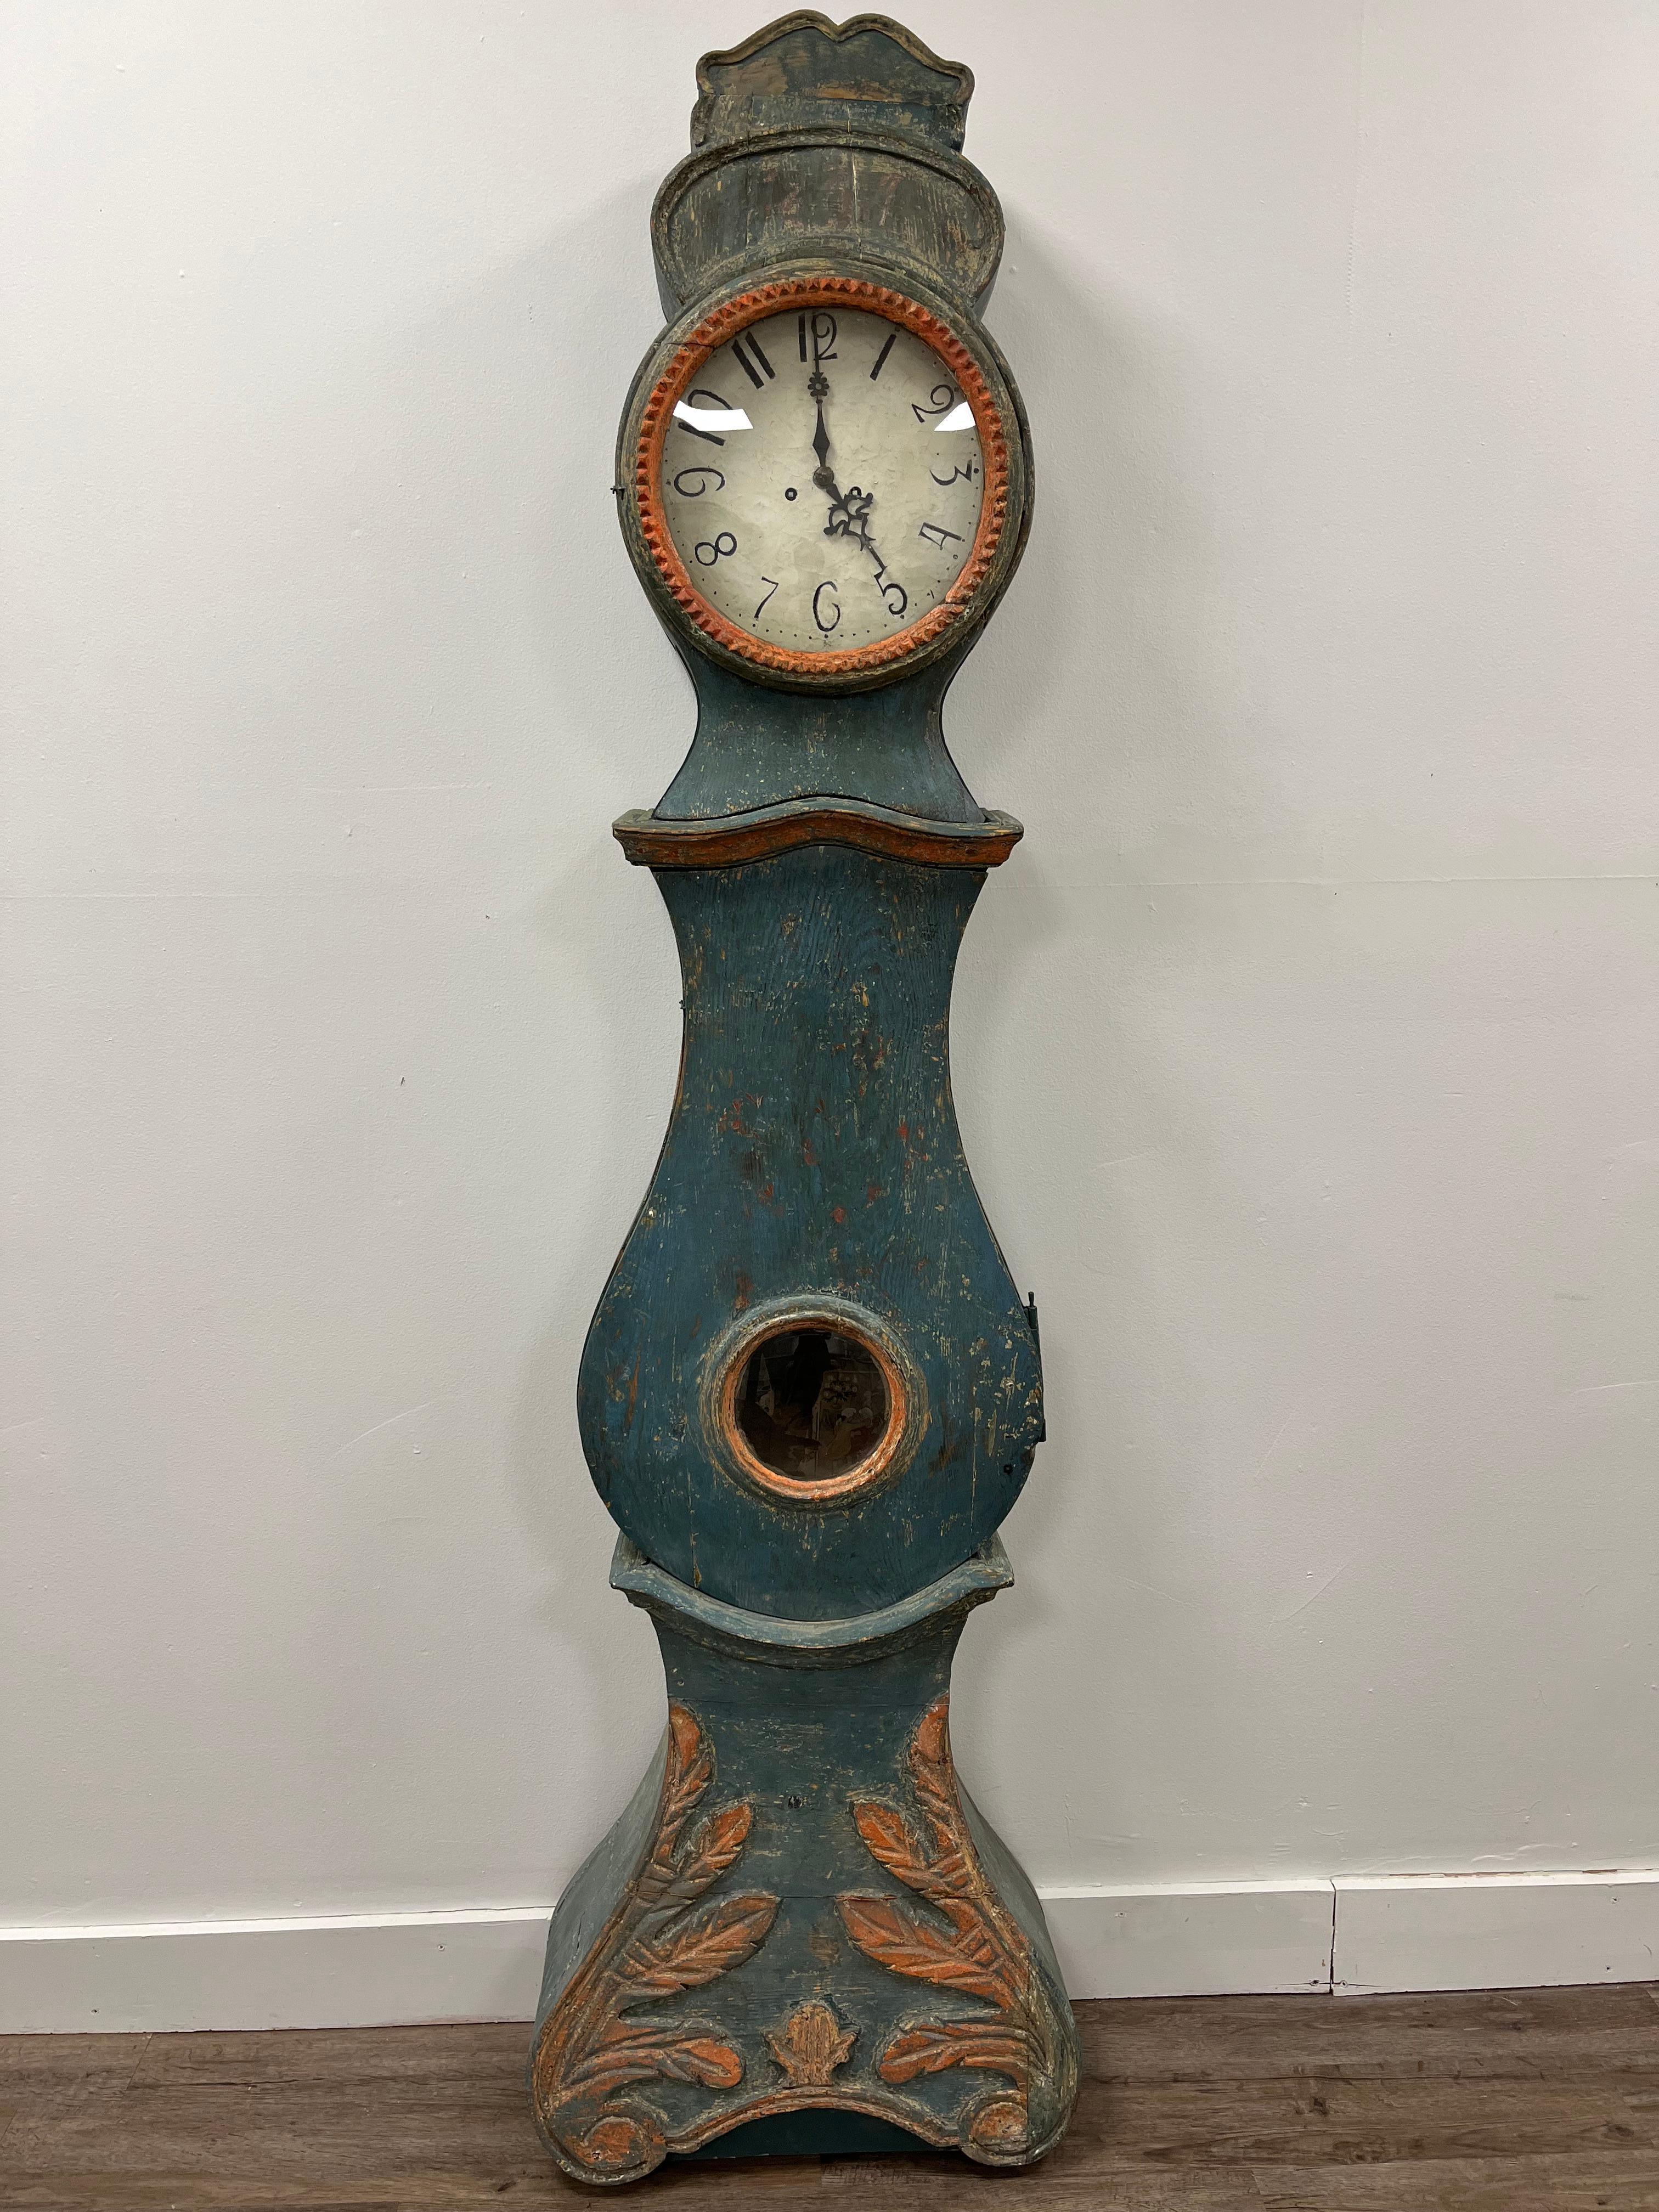 A unique Swedish case clock in original blue and salmon color. The year 1837 can faintly be seen above the clock face. Remnants of 18th century color animations are affixed to the interior. The base has unique leaf detailing. Clock is sold as a